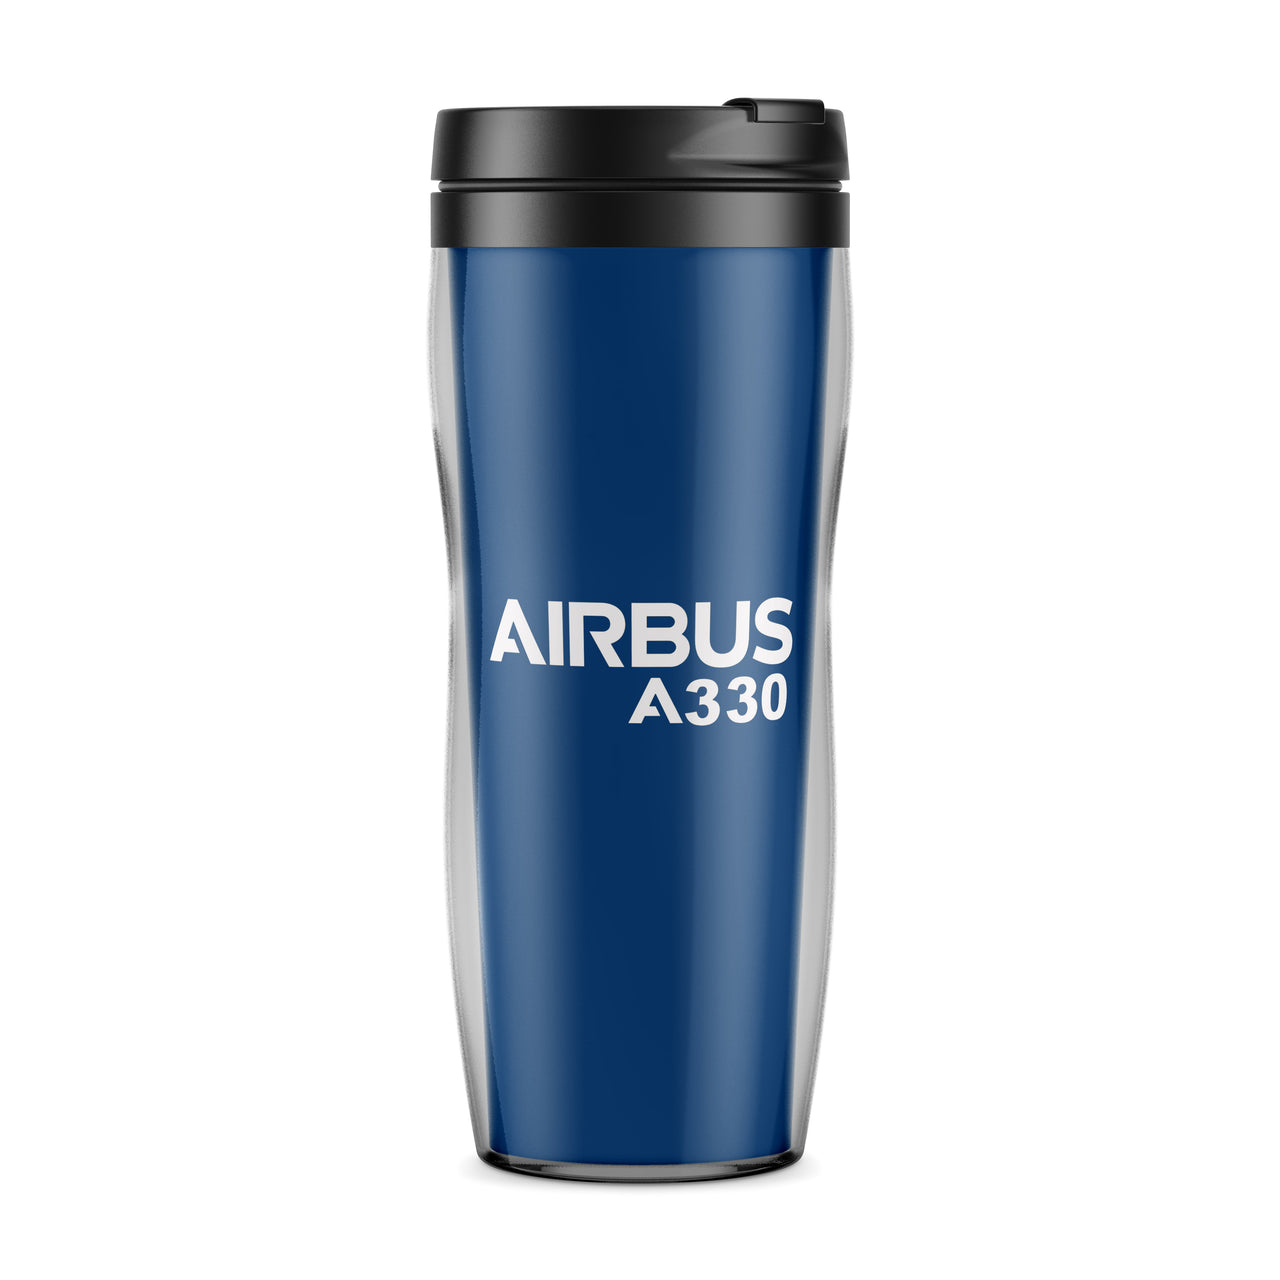 Airbus A330 & Text Designed Travel Mugs